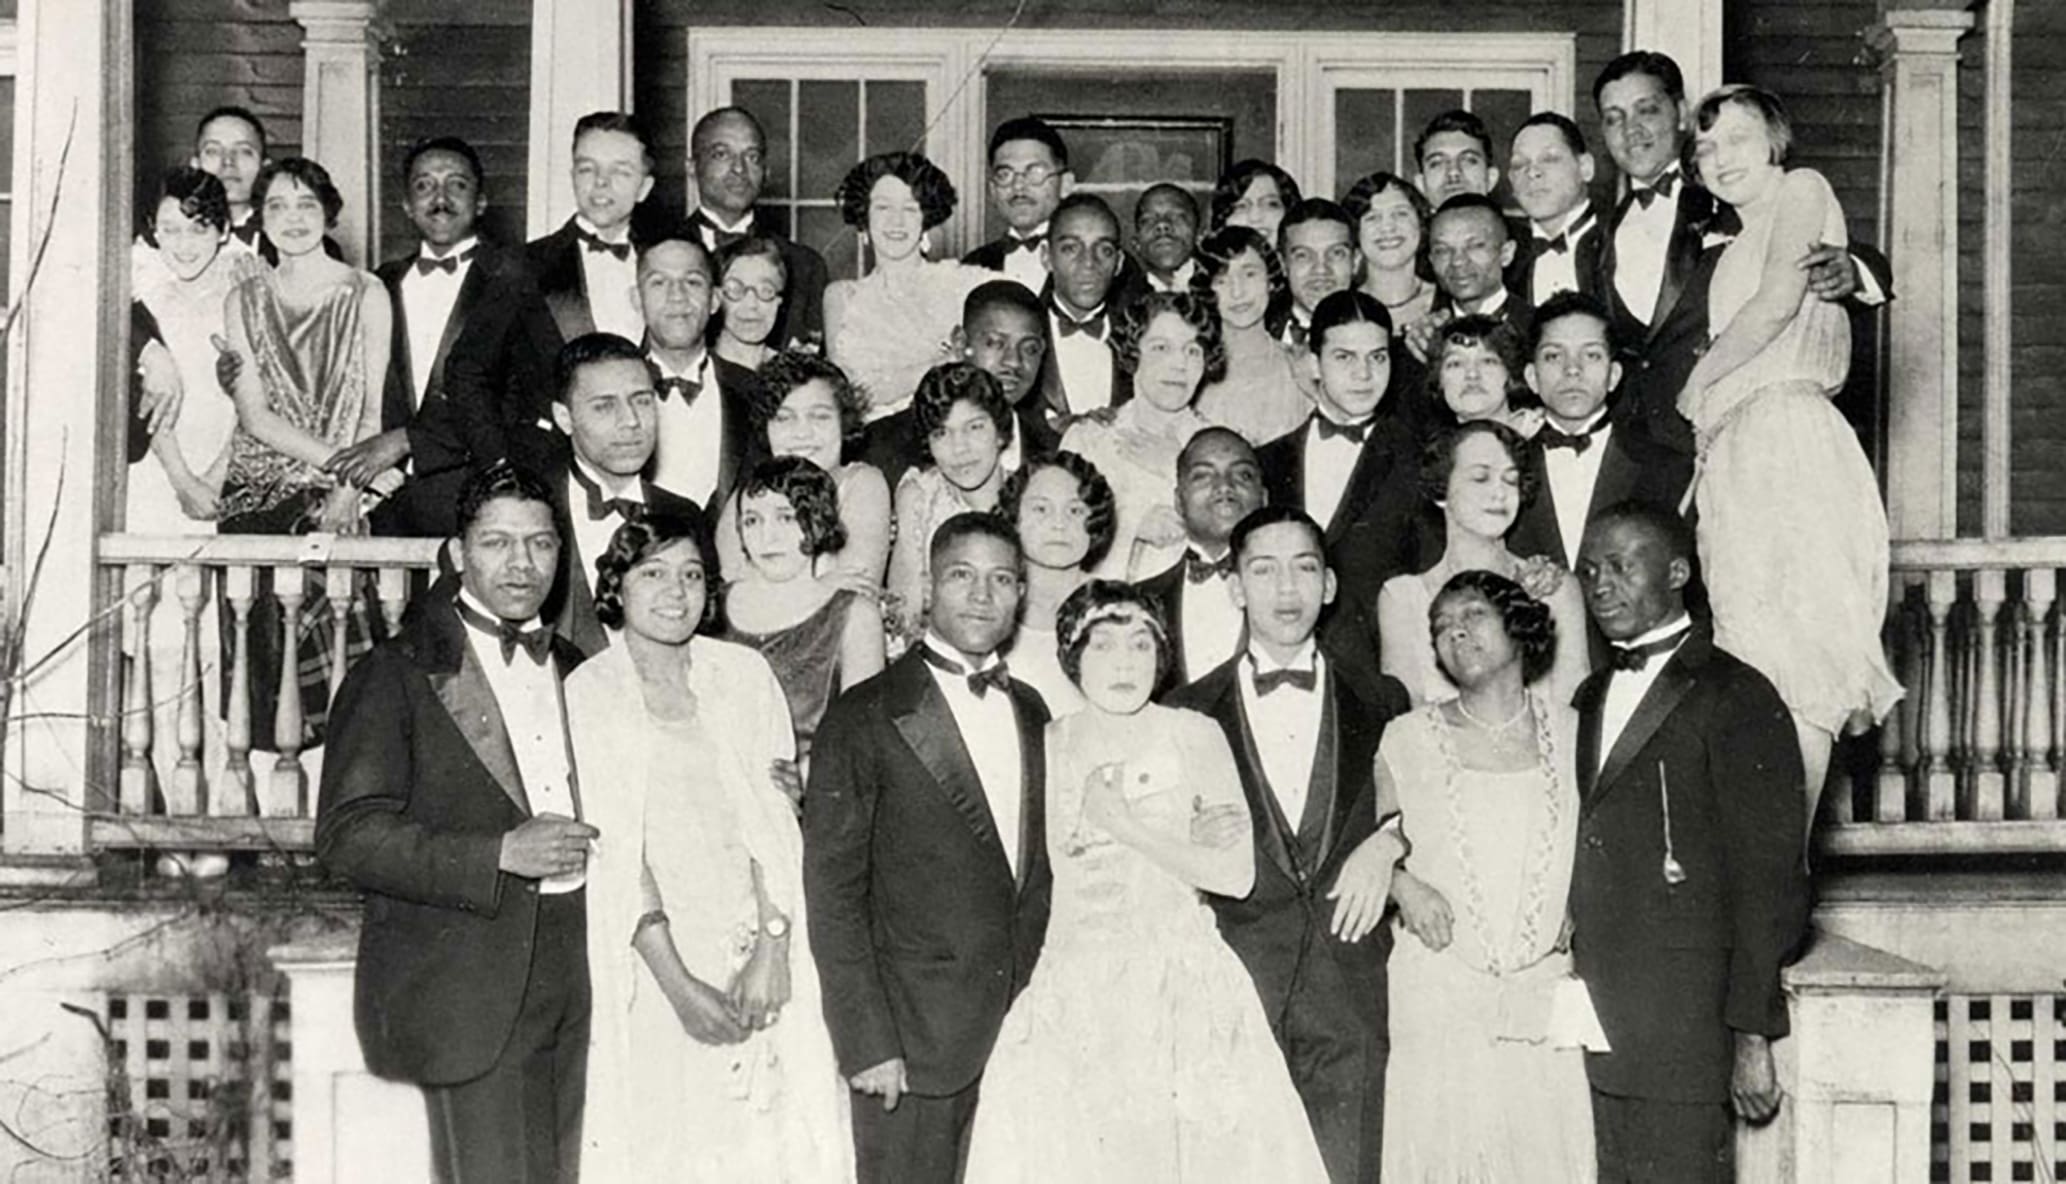 House party at Alpha Phi Alpha Fraternity (Epsilon chapter), May 1927